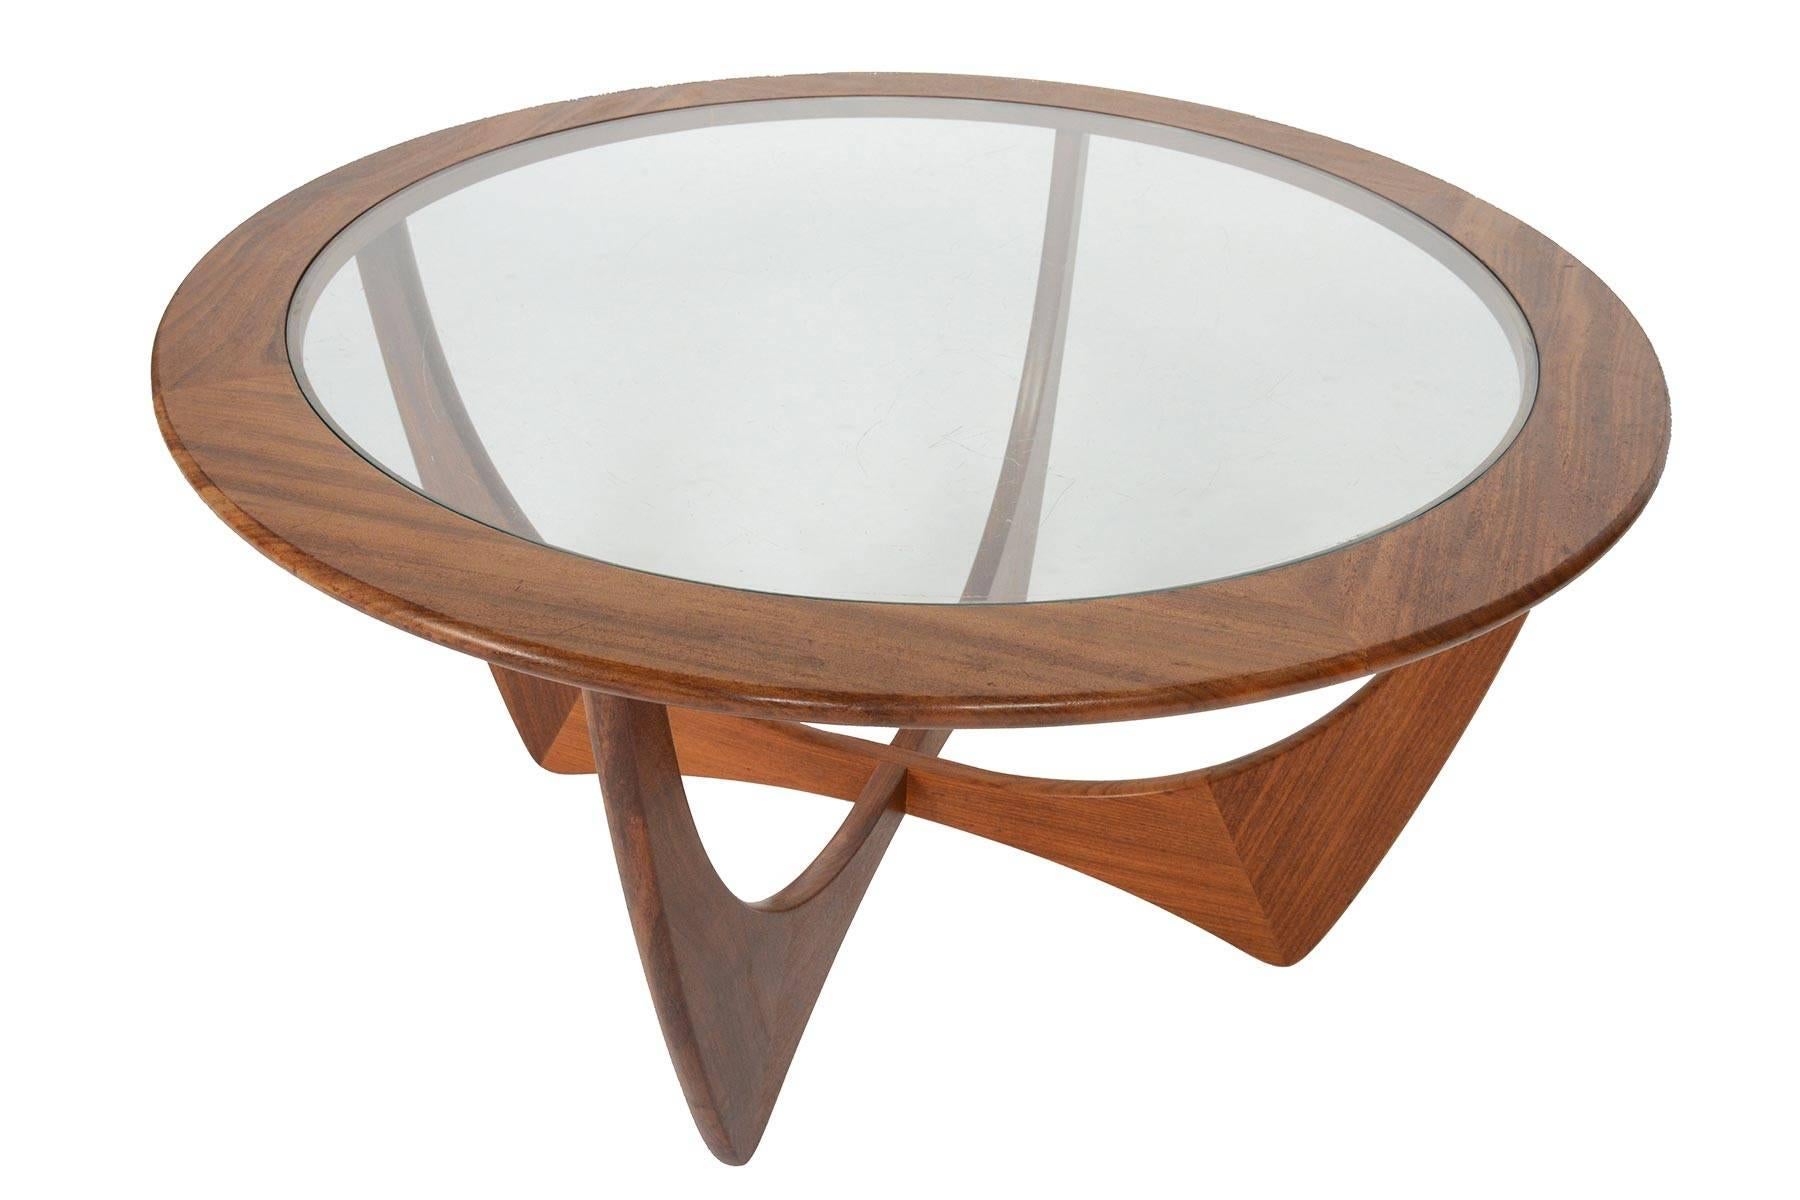 Round G Plan Astro Mid-Century Modern Coffee Table in Afromosia #3 2